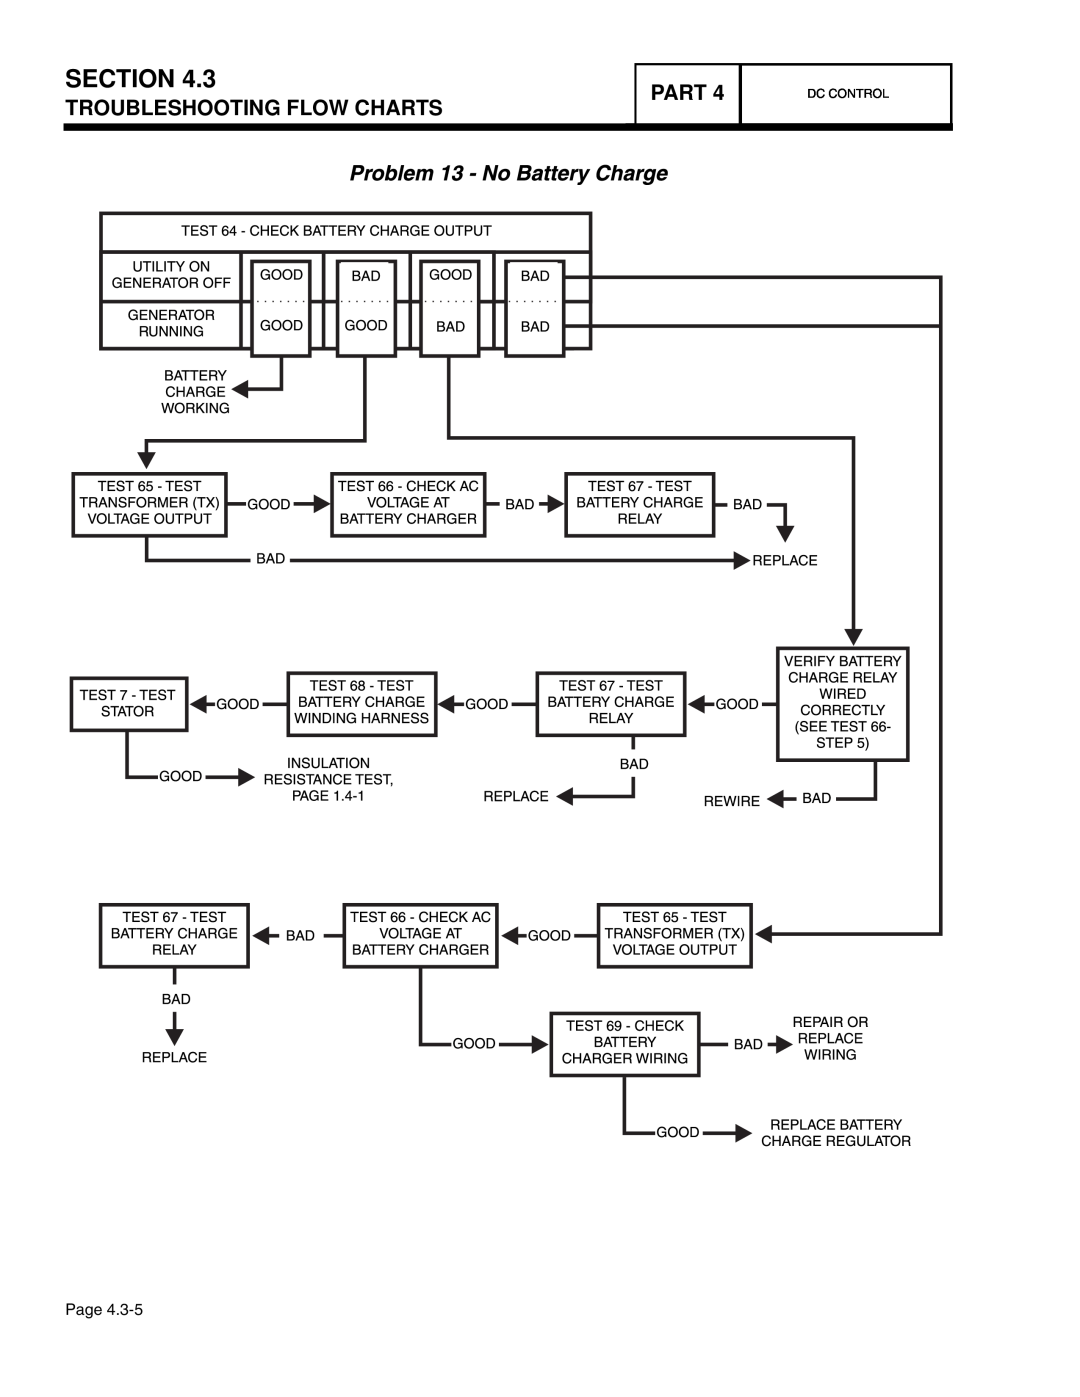 Guardian Technologies 4758, 4456, 4390, 4389, 4760, 4759 manual Section, Troubleshooting Flow Charts, Part, Dc Control 